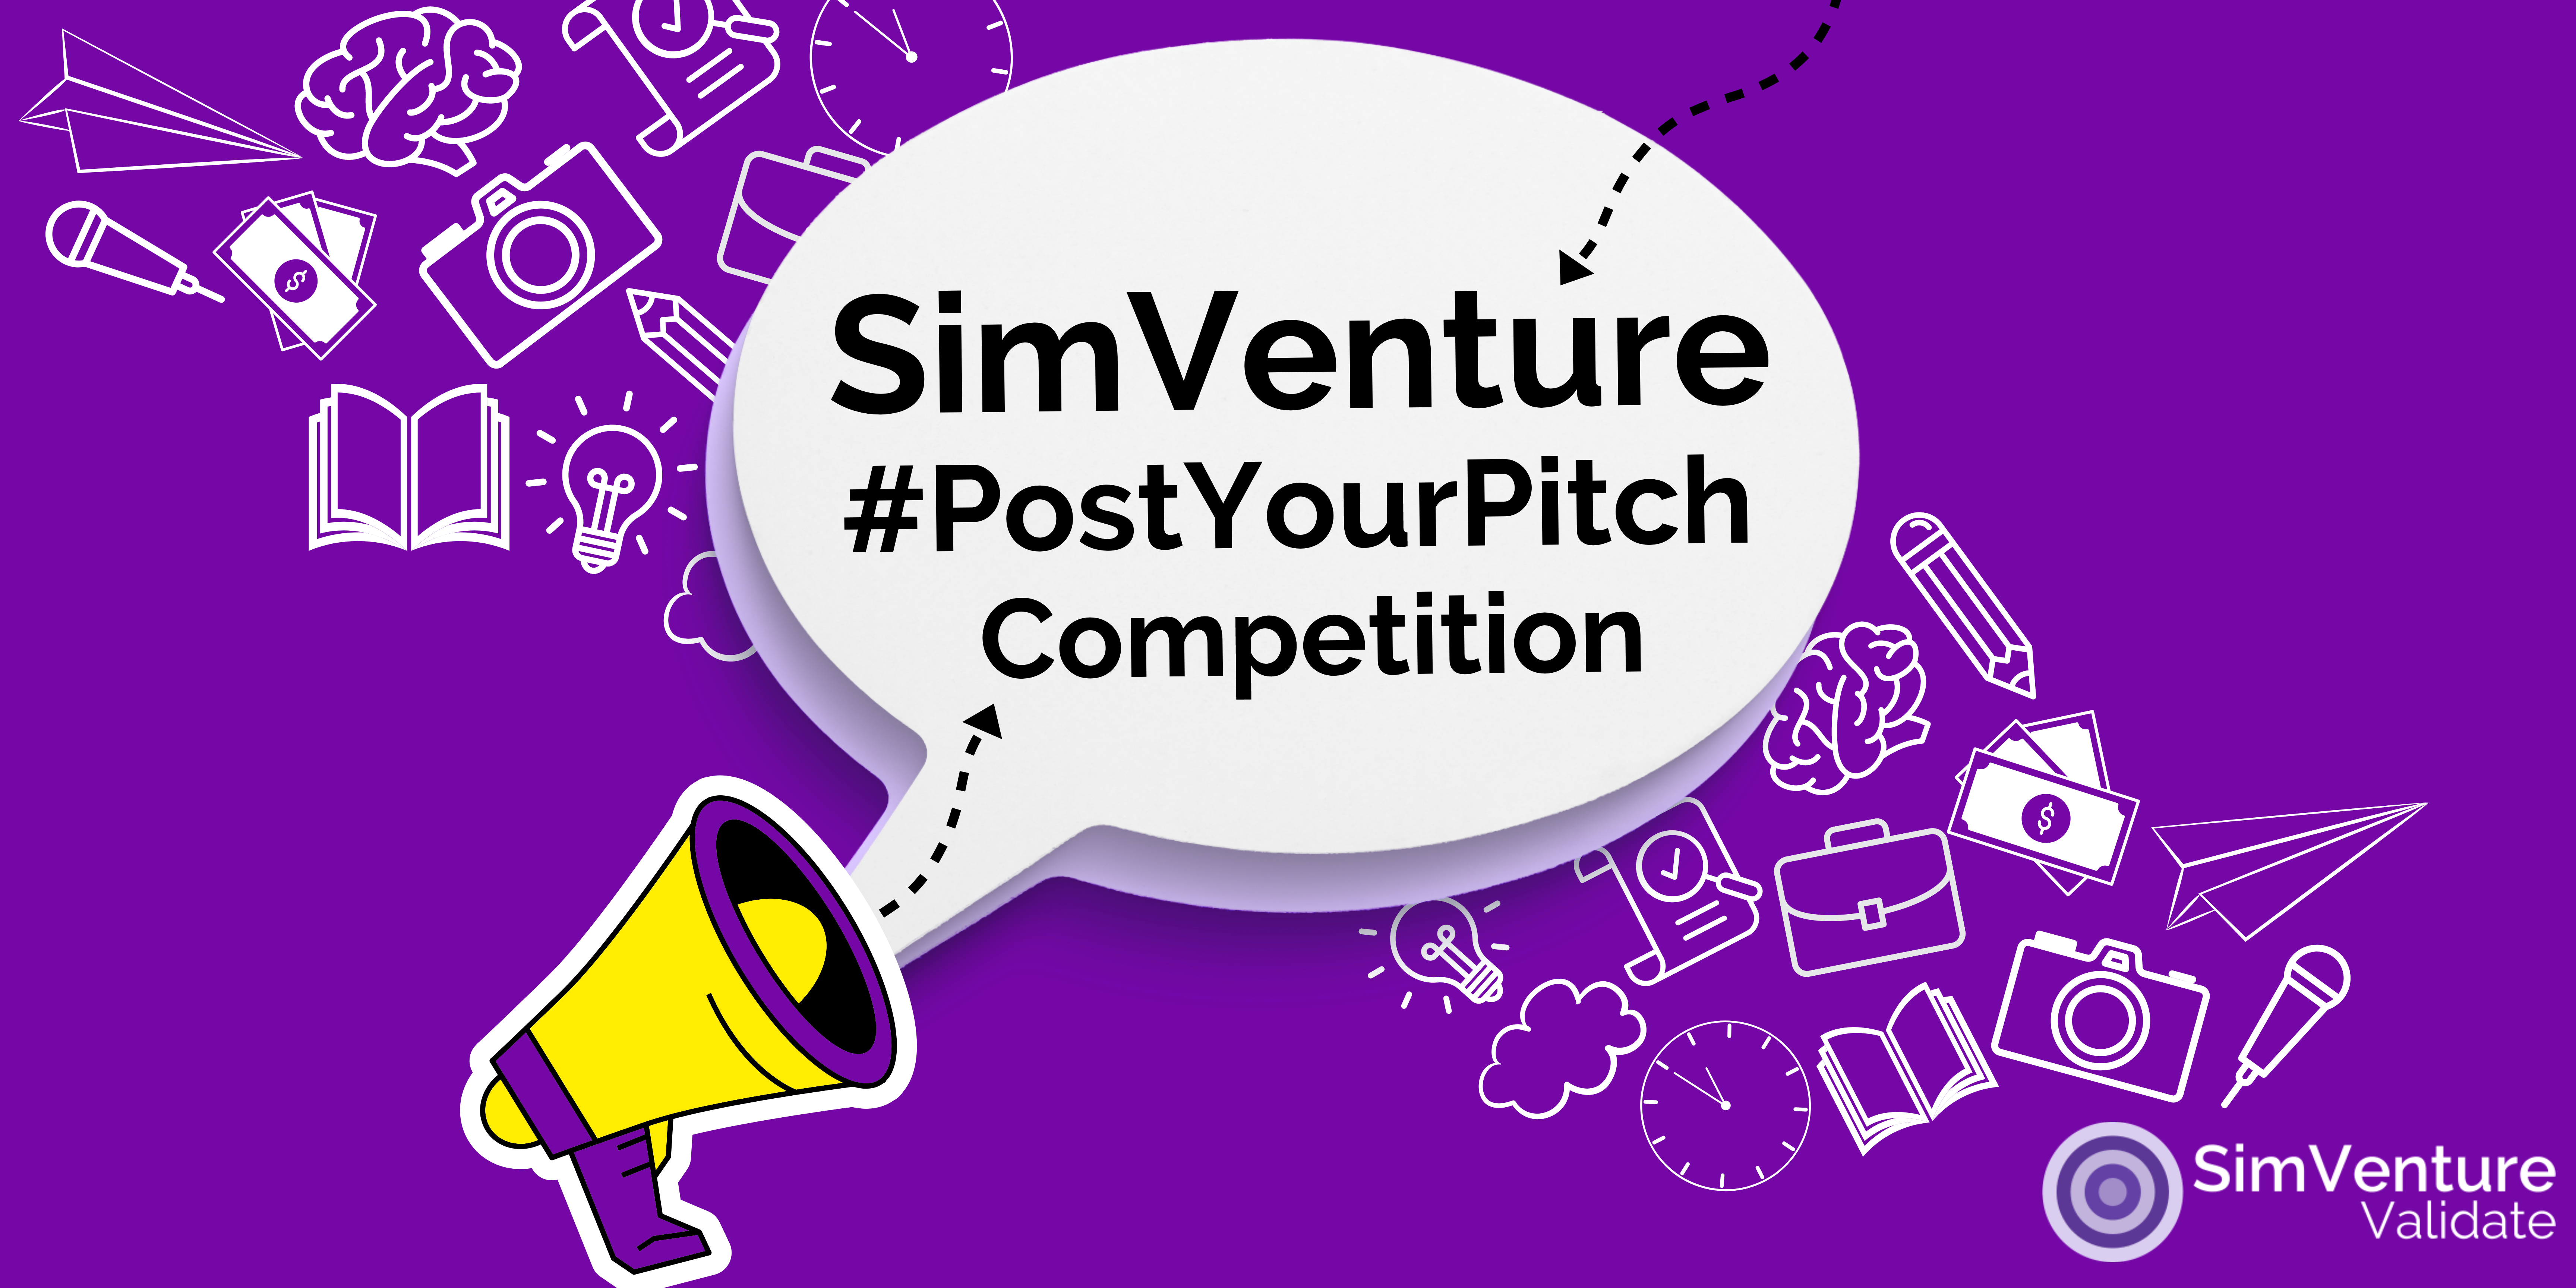 Post Your Pitch SimVenture Validate Social Media Competition